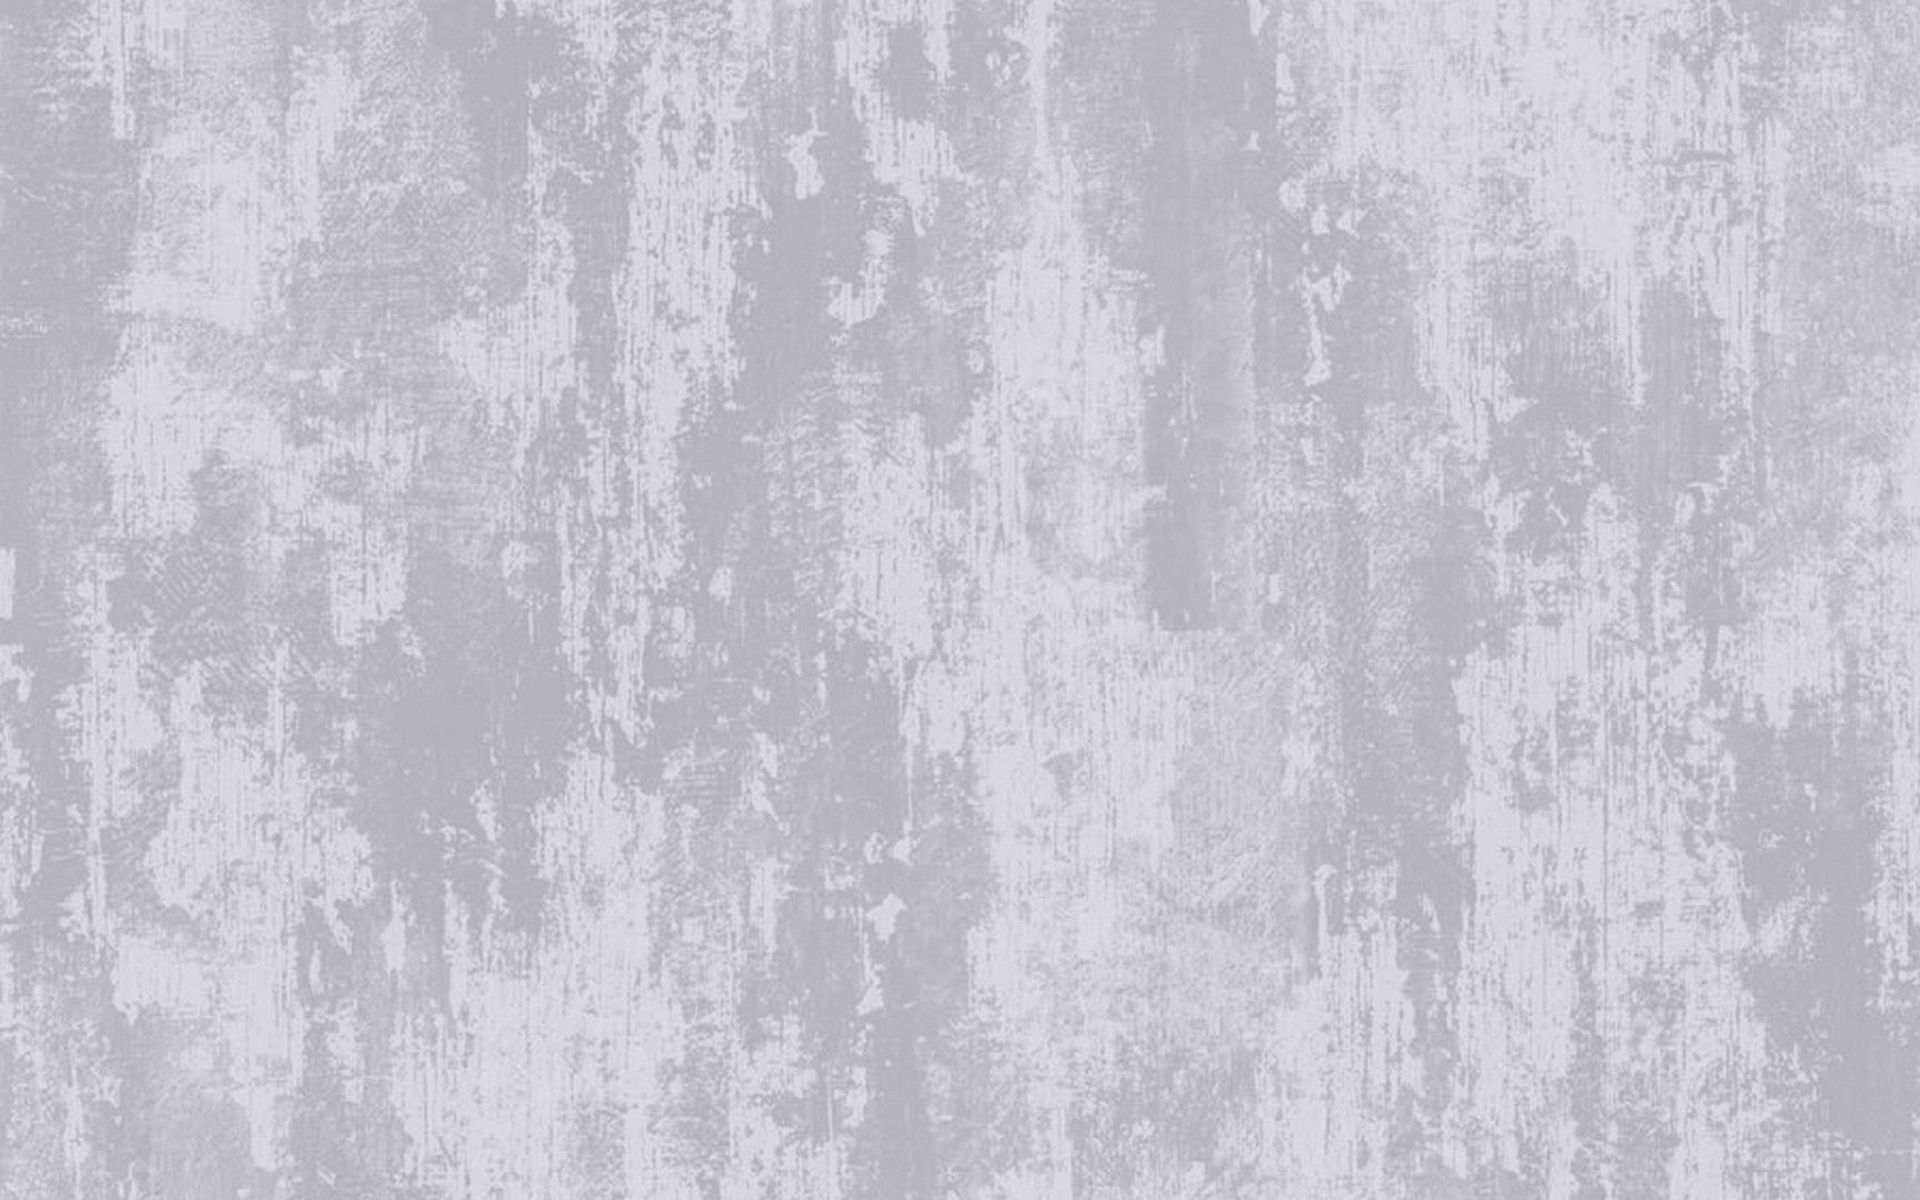 A grey wallpaper with white paint - Gray, silver